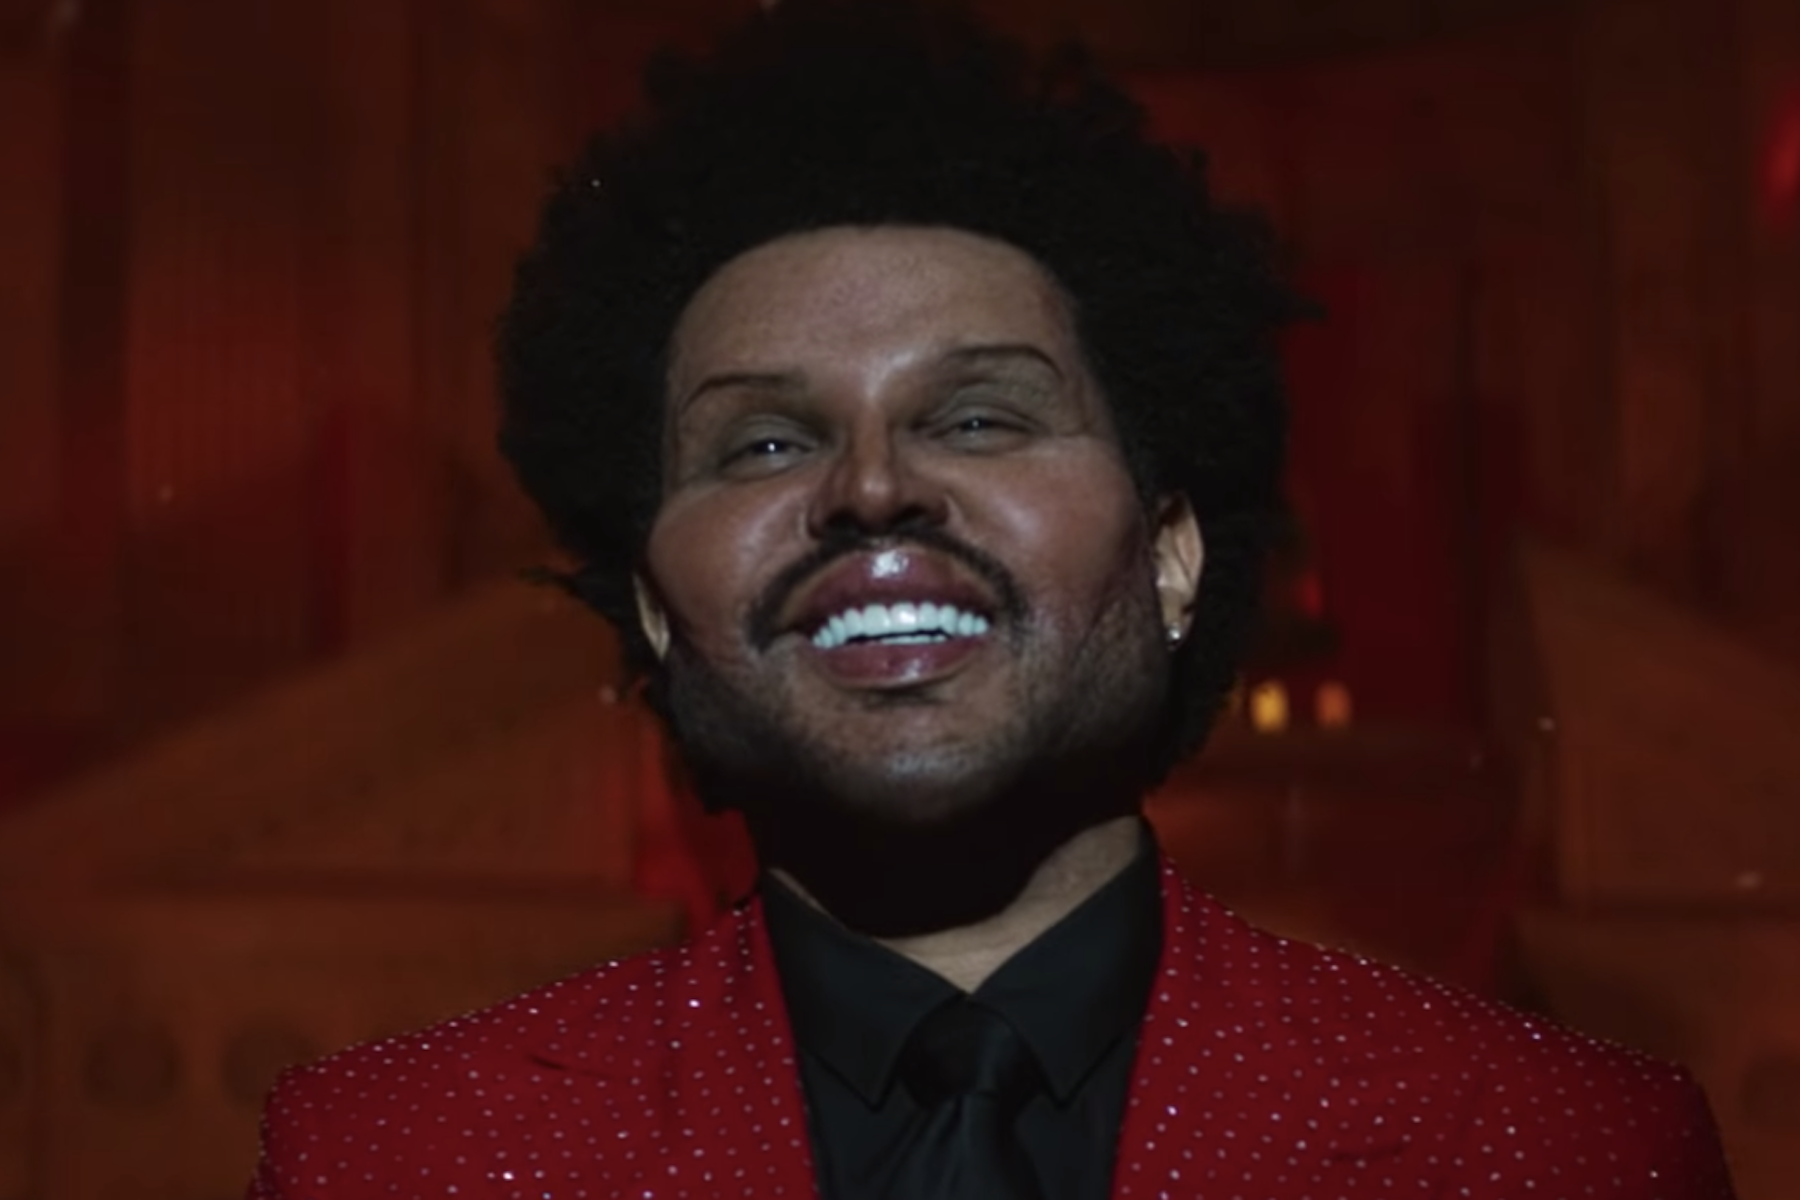 Why The Weeknd's Face Looks So Different in His Music Video for 'Save Your Tears'